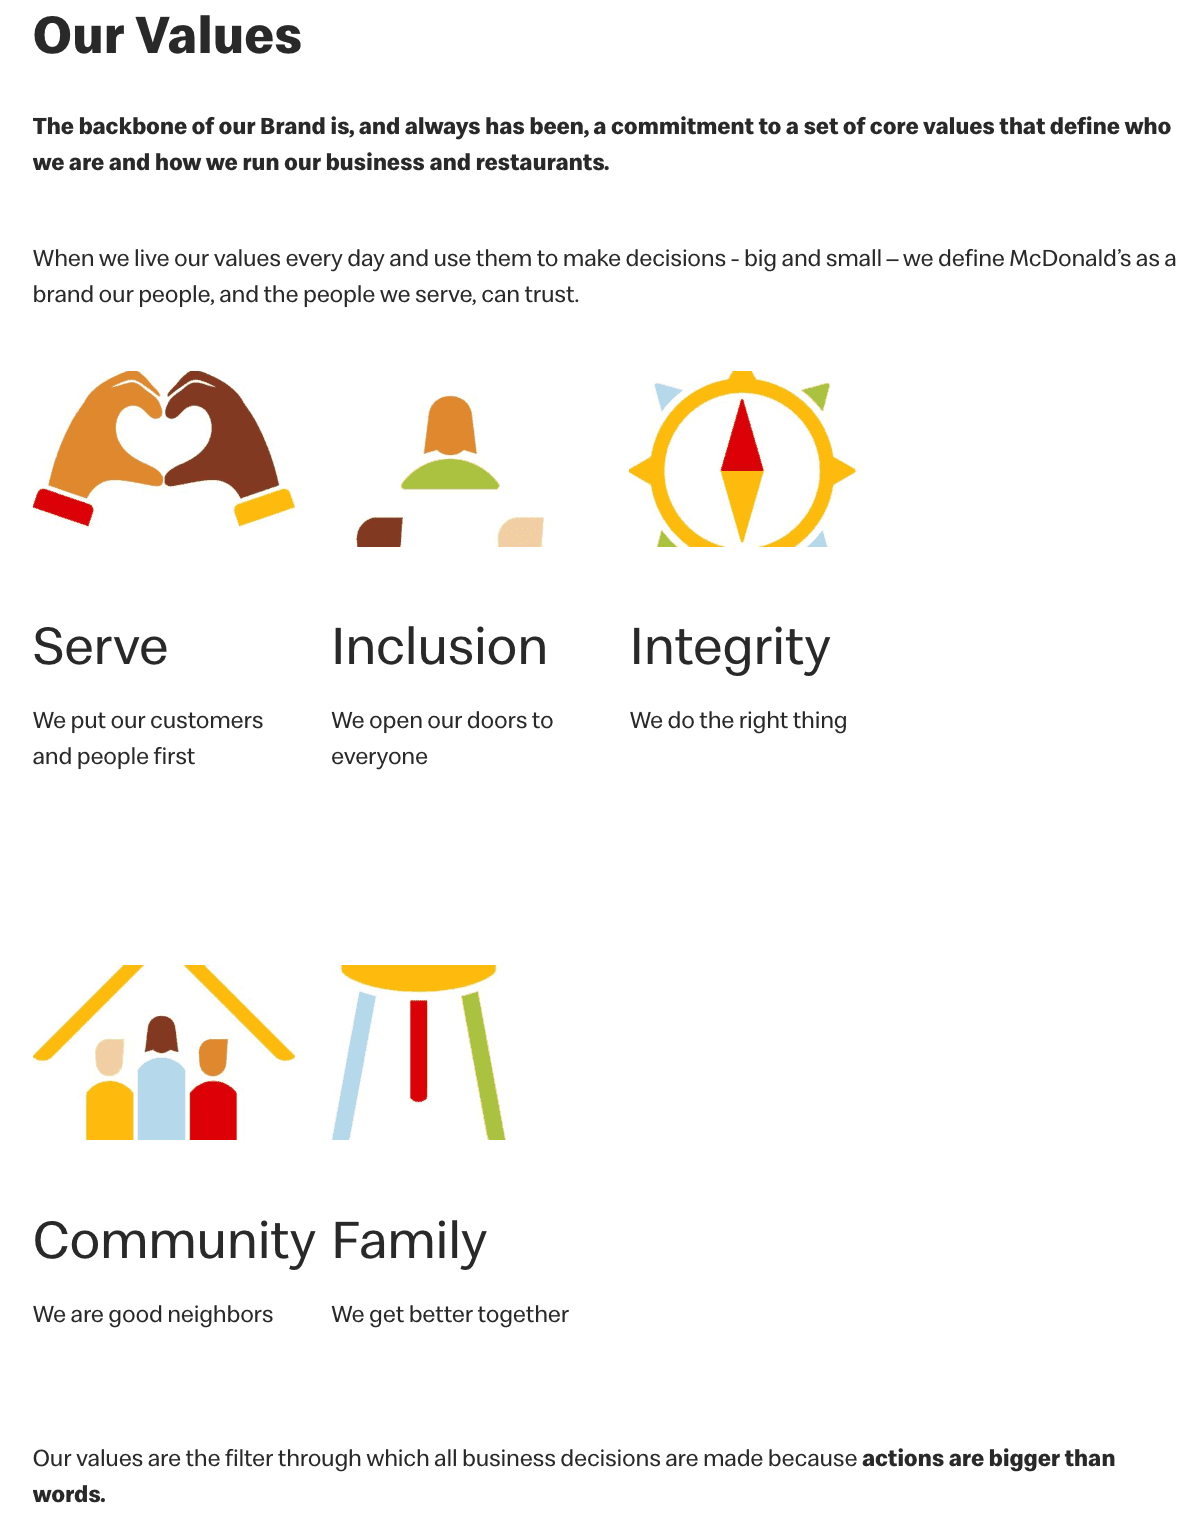 The 5 Values of McDonald's listed as Serve, Inclusion, Integrity, Community, and Family.